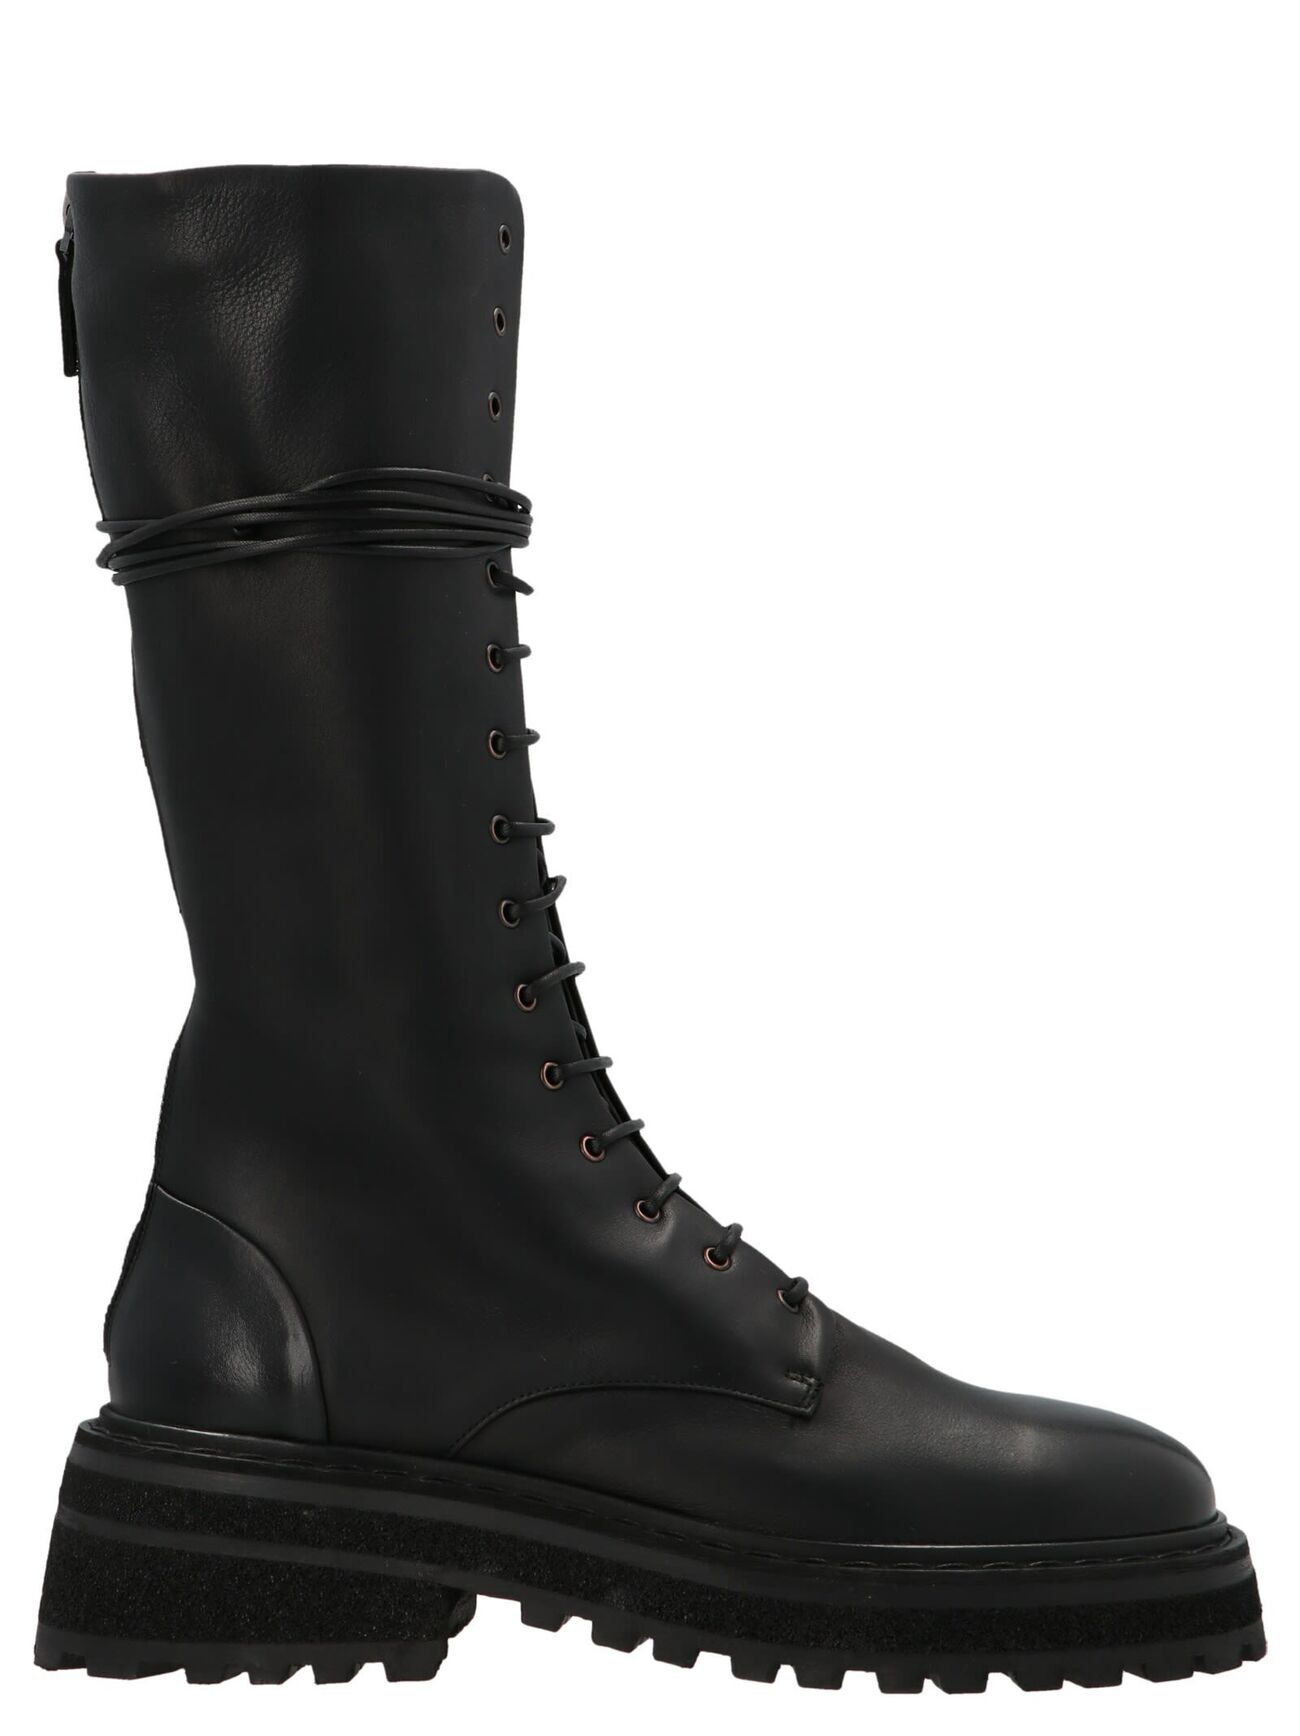 Marsell carro Combat Boots in black